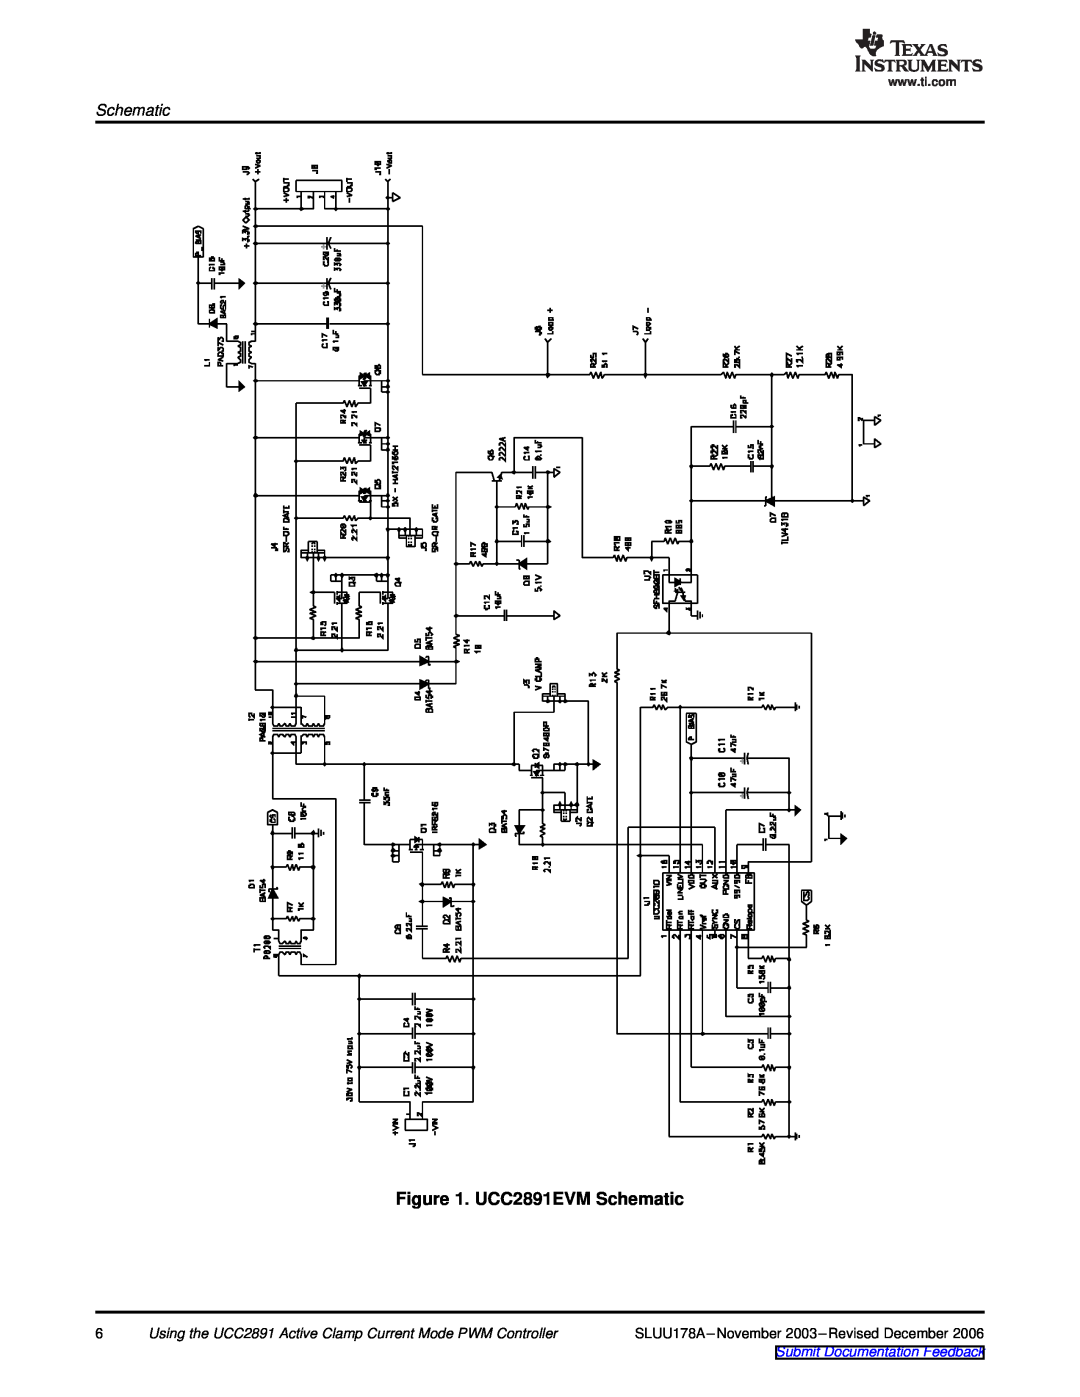 Texas Instruments manual UCC2891EVM Schematic, Using the UCC2891 Active Clamp Current Mode PWM Controller 